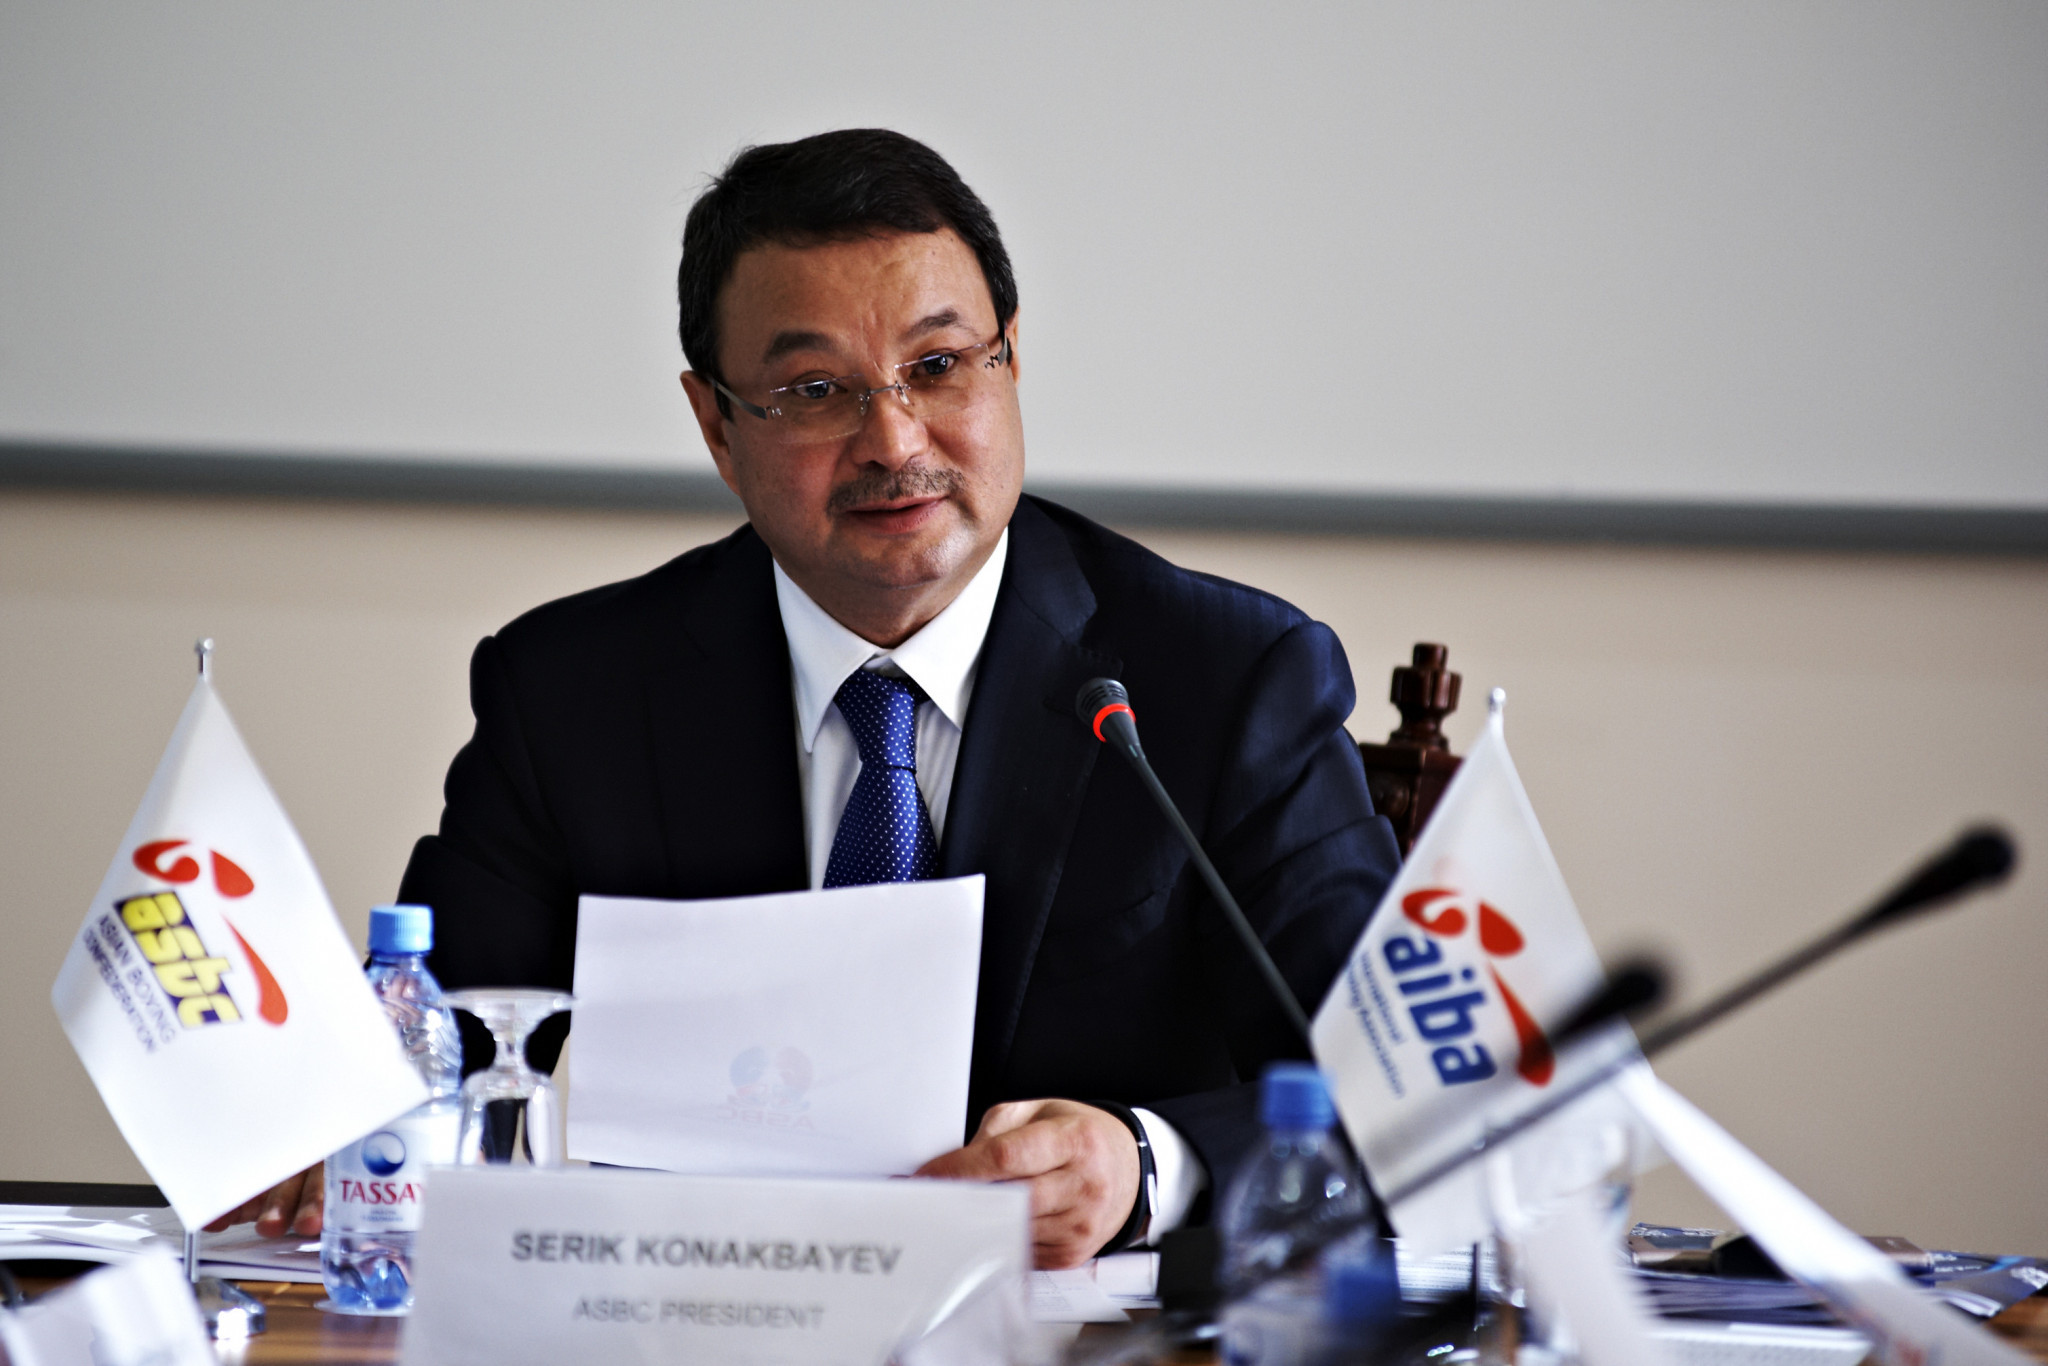 Former AIBA executive director Ho Kim had been a key figure in the campaign to get Serik Konakbayev elected as President of the world governing body ©ASBC